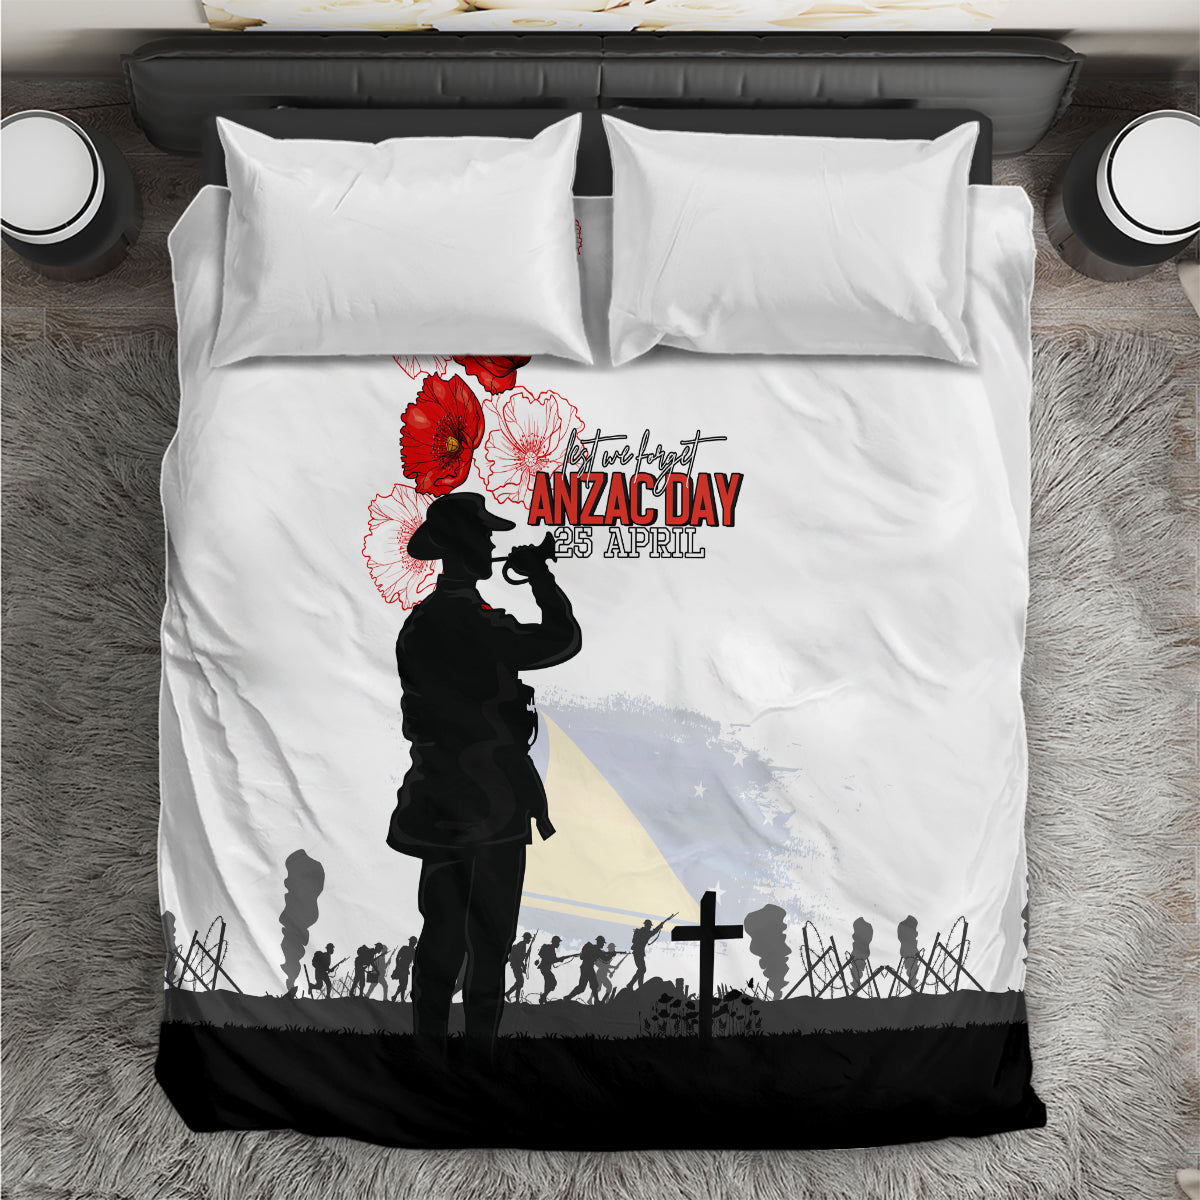 Tokelau ANZAC Day Bedding Set Lest We Forget Red Poppy Flowers and Soldier LT03 White - Polynesian Pride